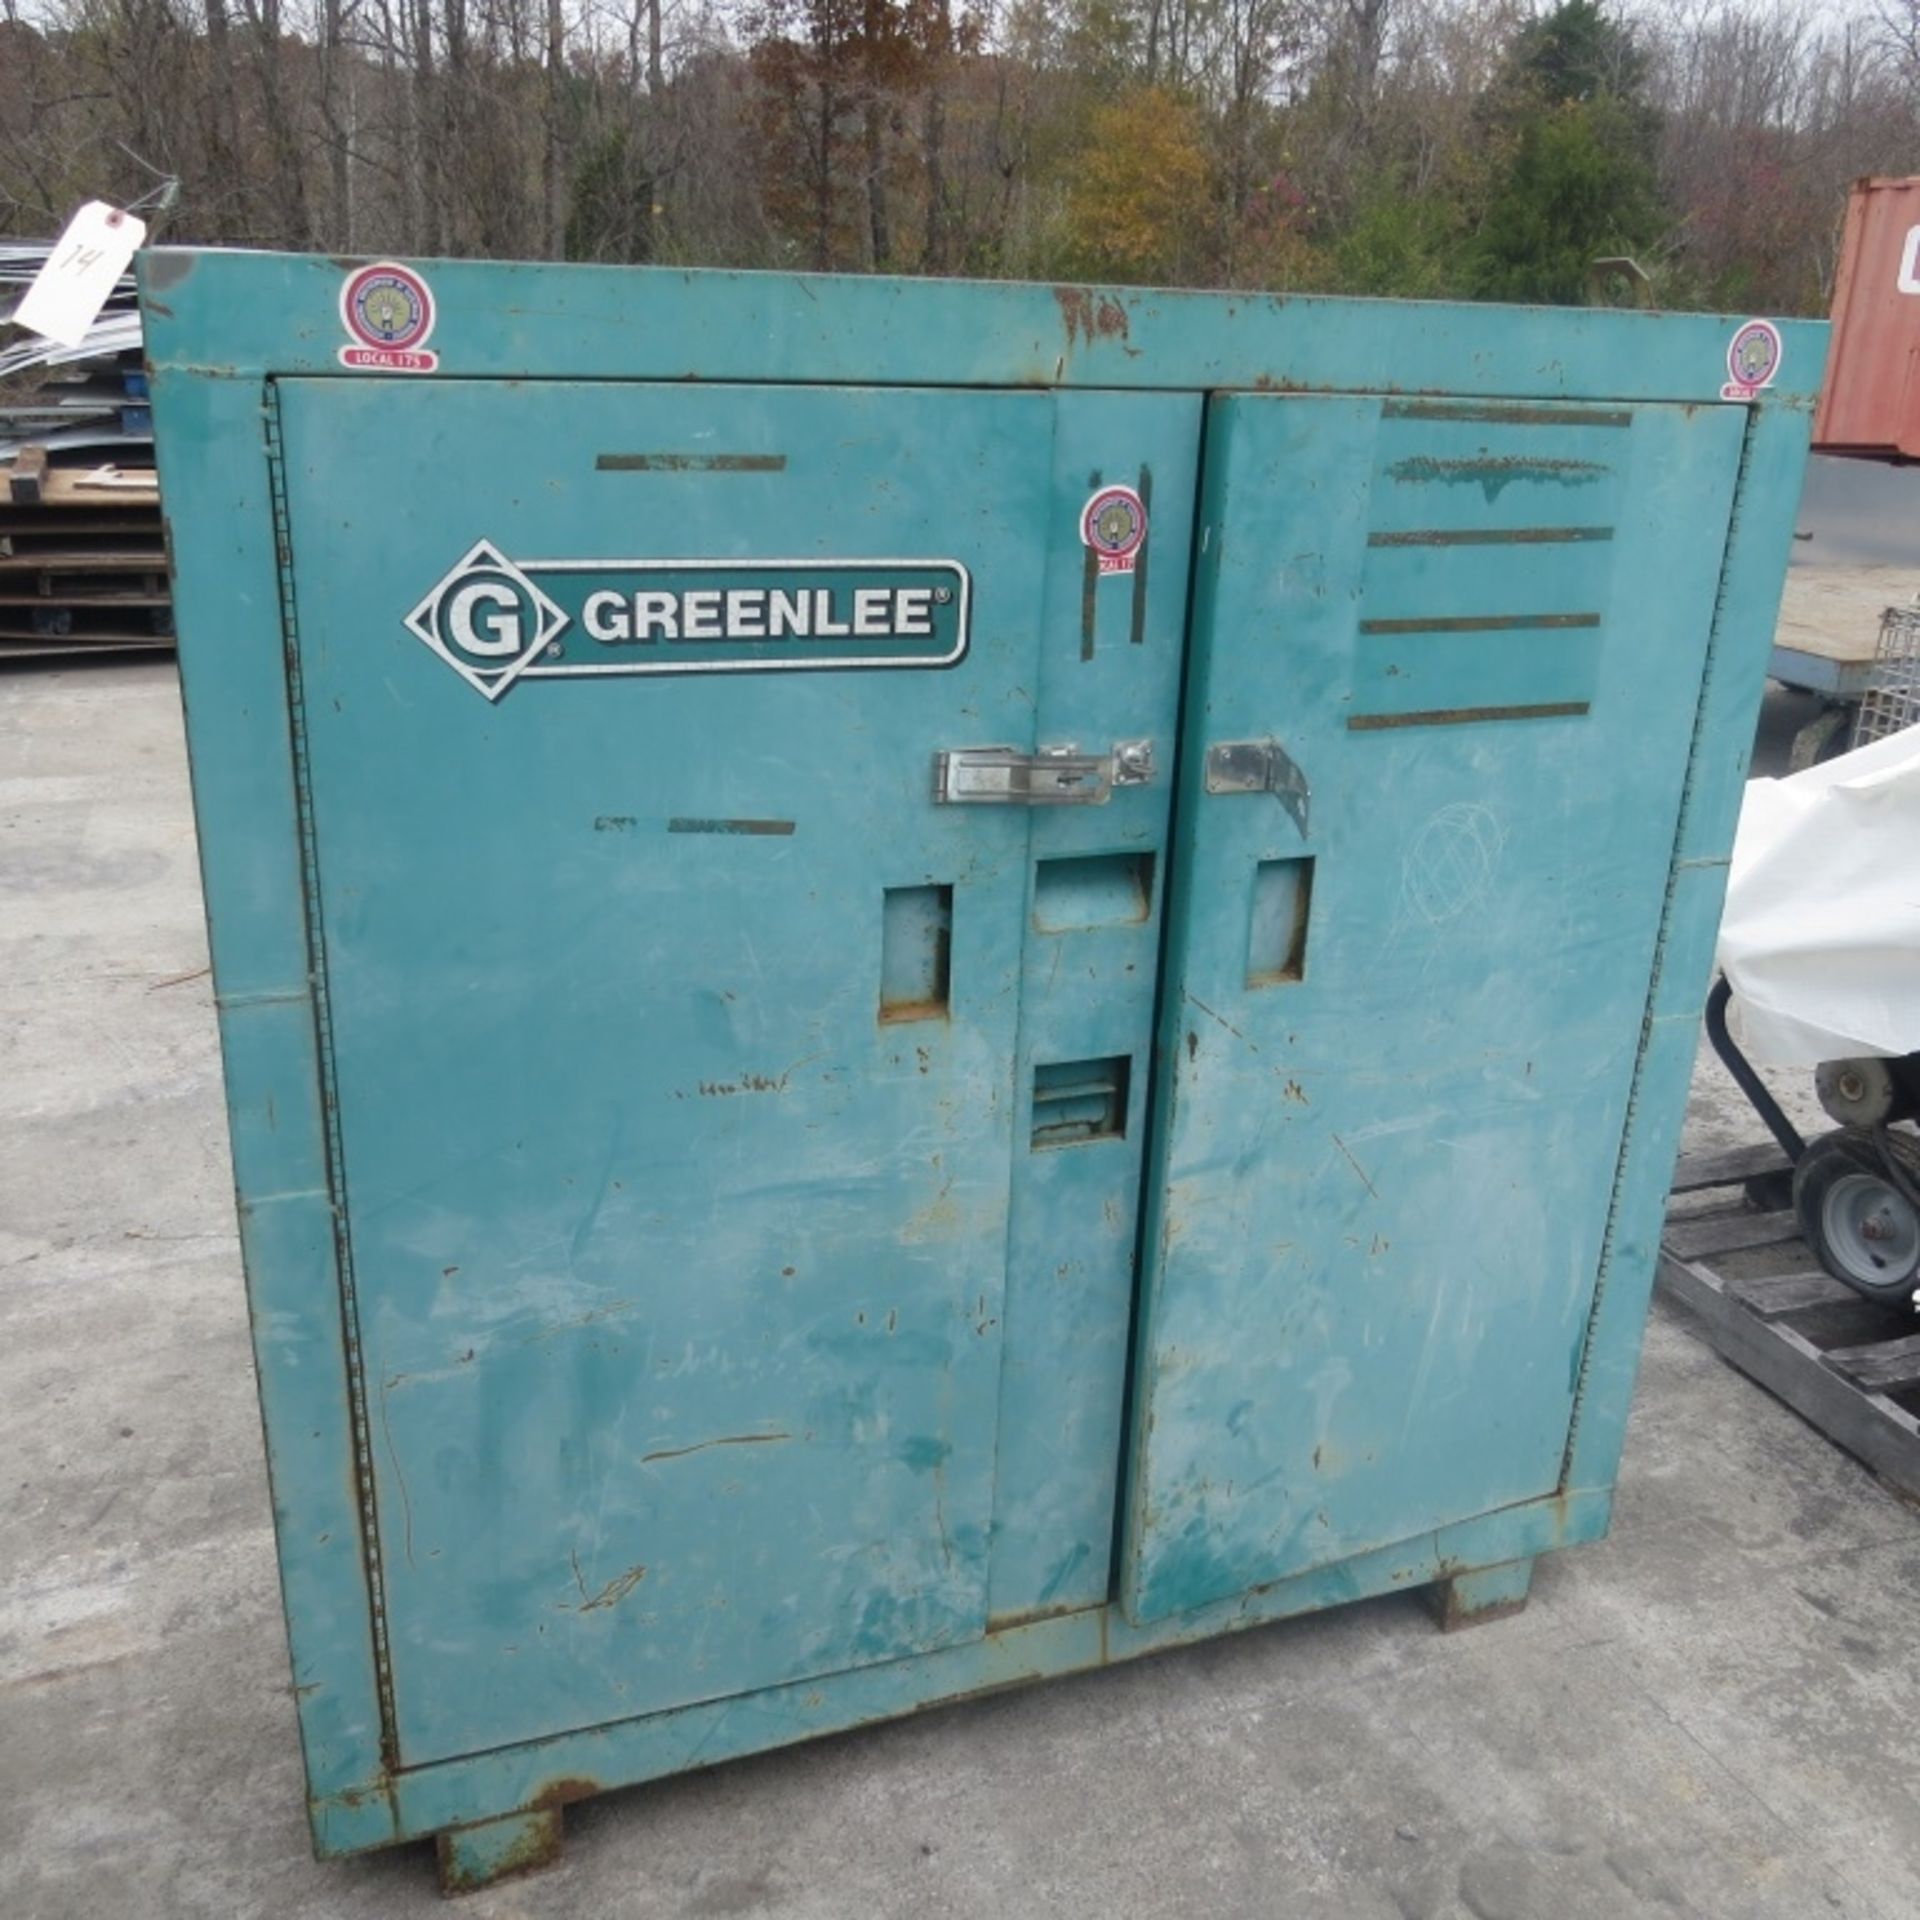 GreenLee Job Box and Contents